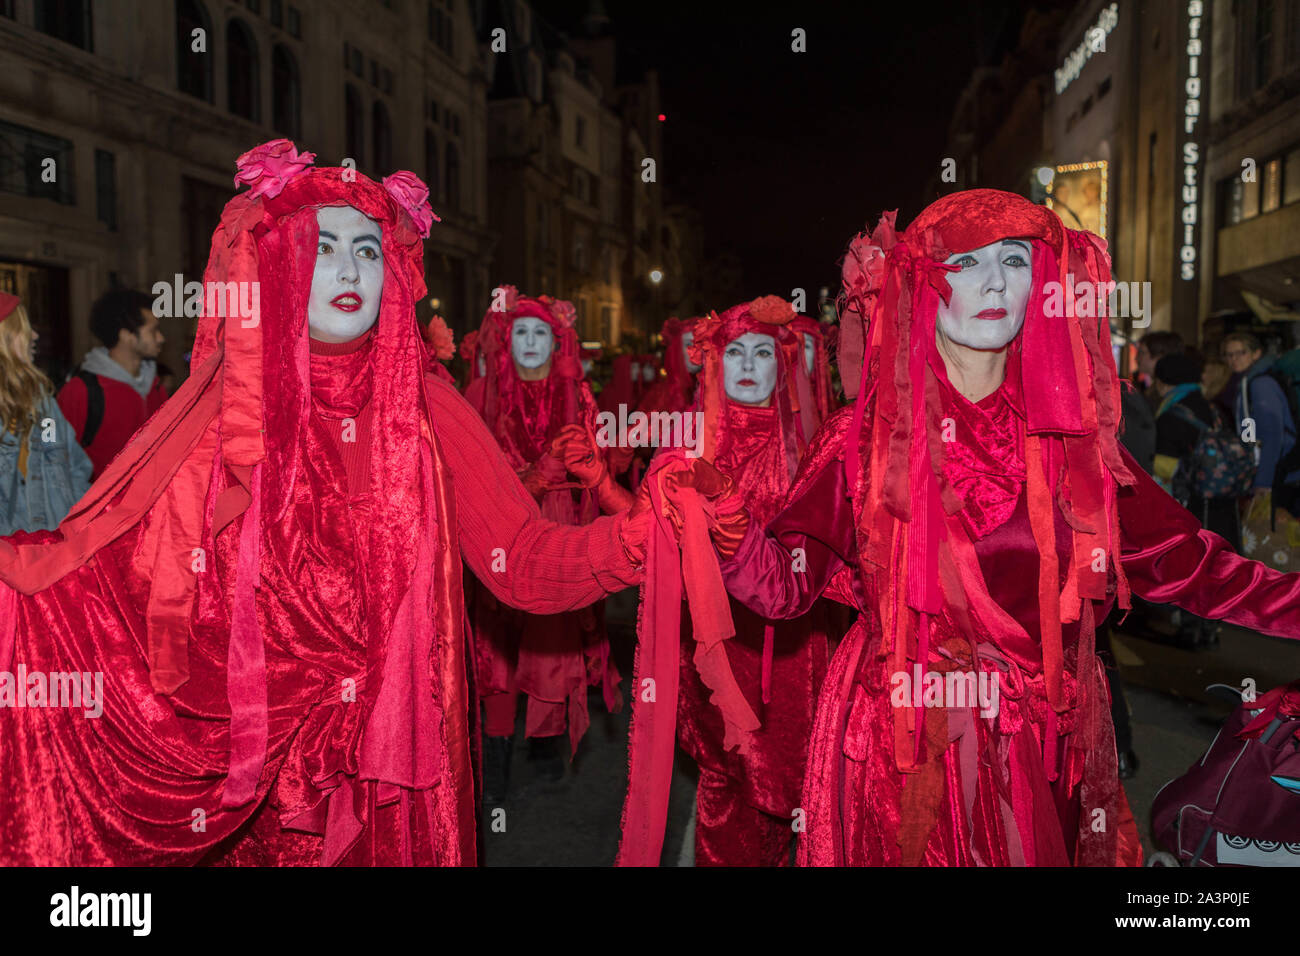 Trafalgar Square, London, UK. 9th Oct, 2019. The Red Brigade, also known as the Invisible circus, join the Extinction Rebellion protest at Trafalgar Square. Penelope Barritt/alamy Live News Stock Photo